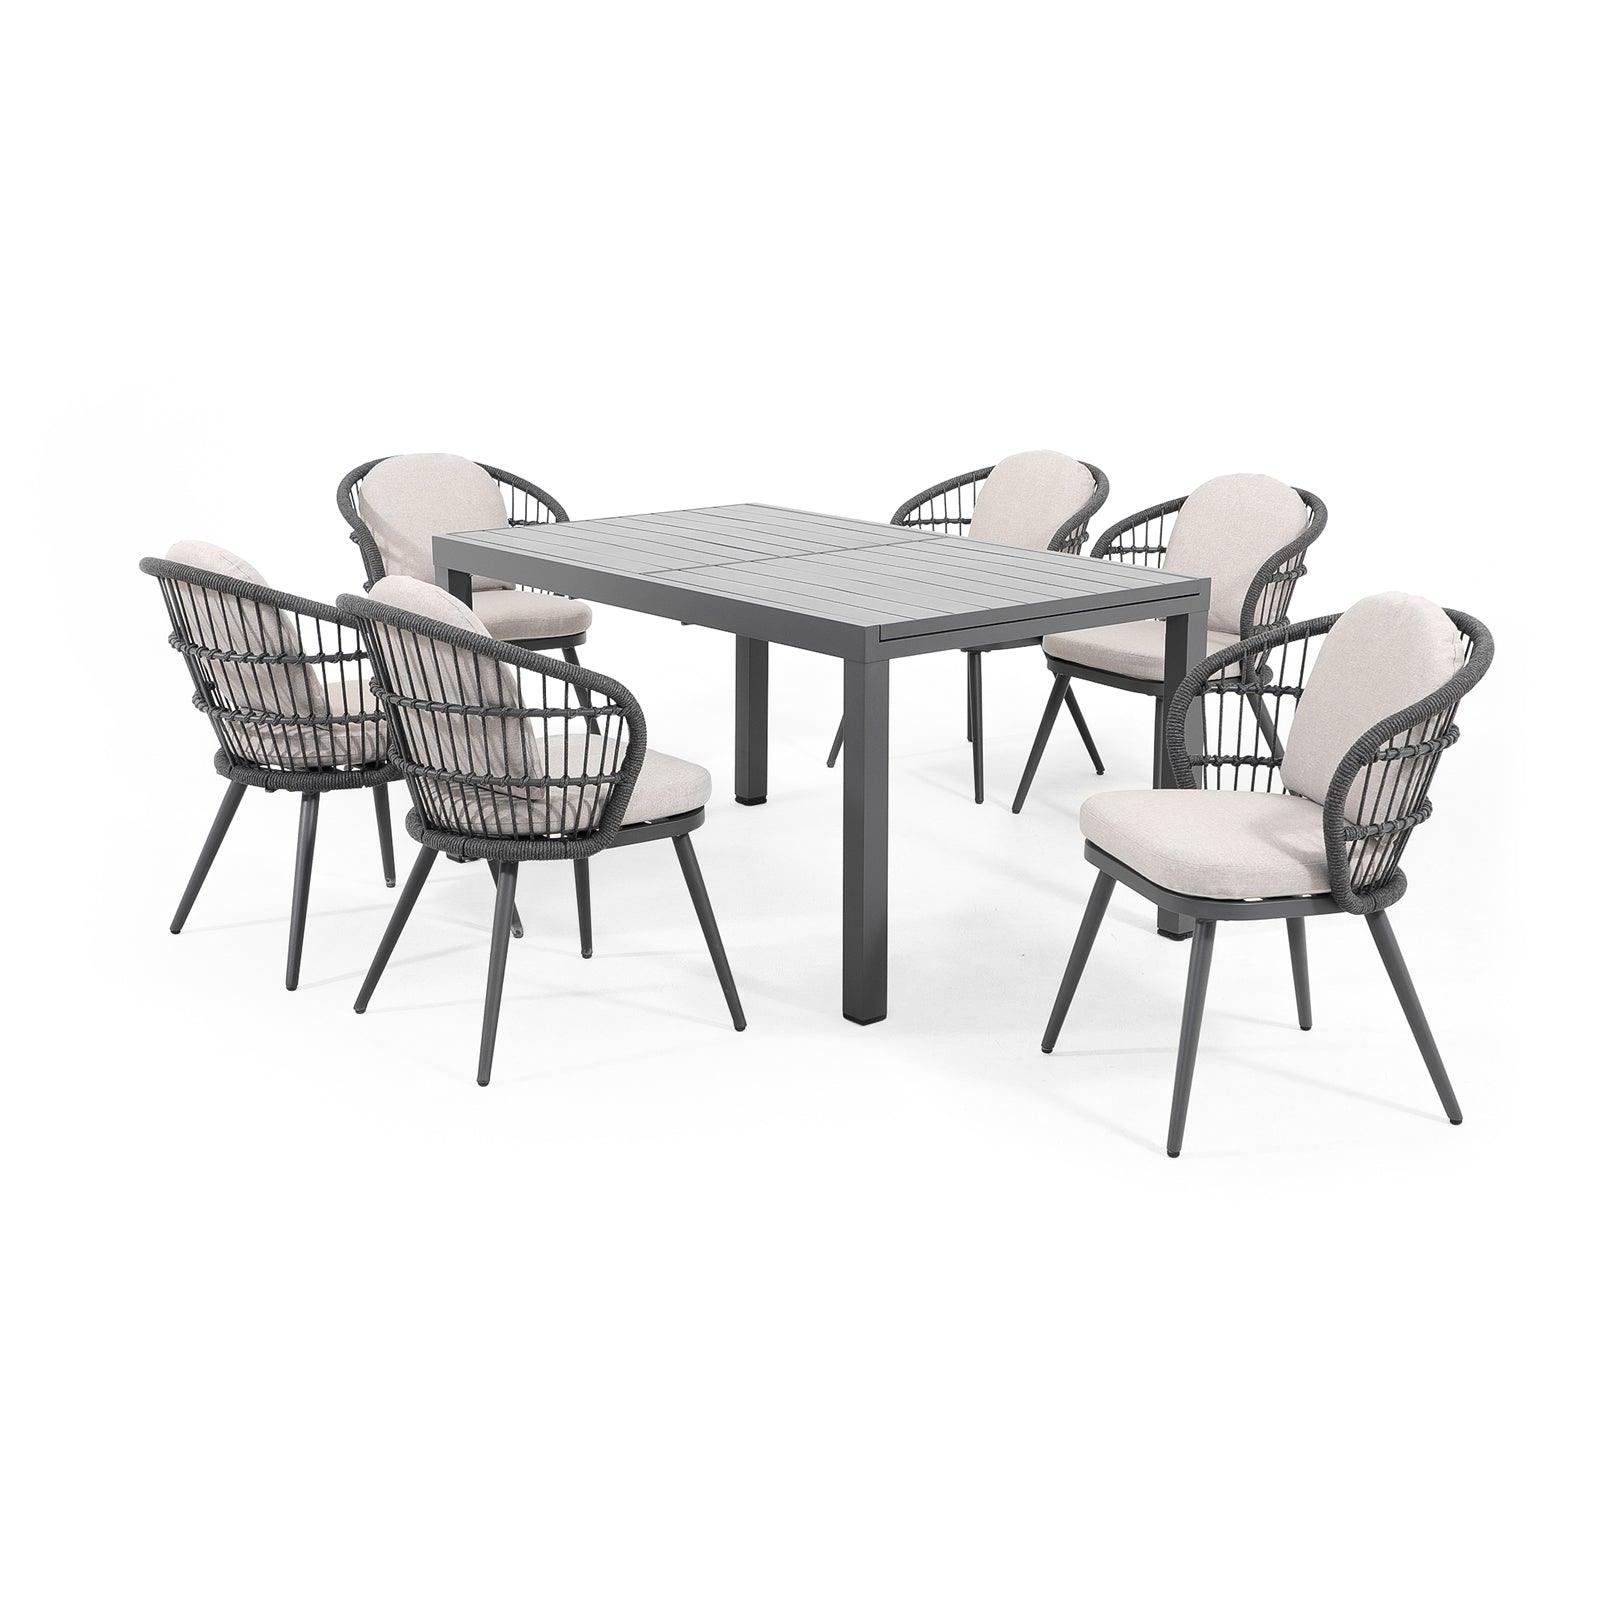 Comino dark grey aluminum outdoor Dining Set for 6 with light grey cushions, 6 dining seats with backrest rope design, 1 extendable rectangle aluminum dining table - Jardina Furniture#Pieces_7-pc.